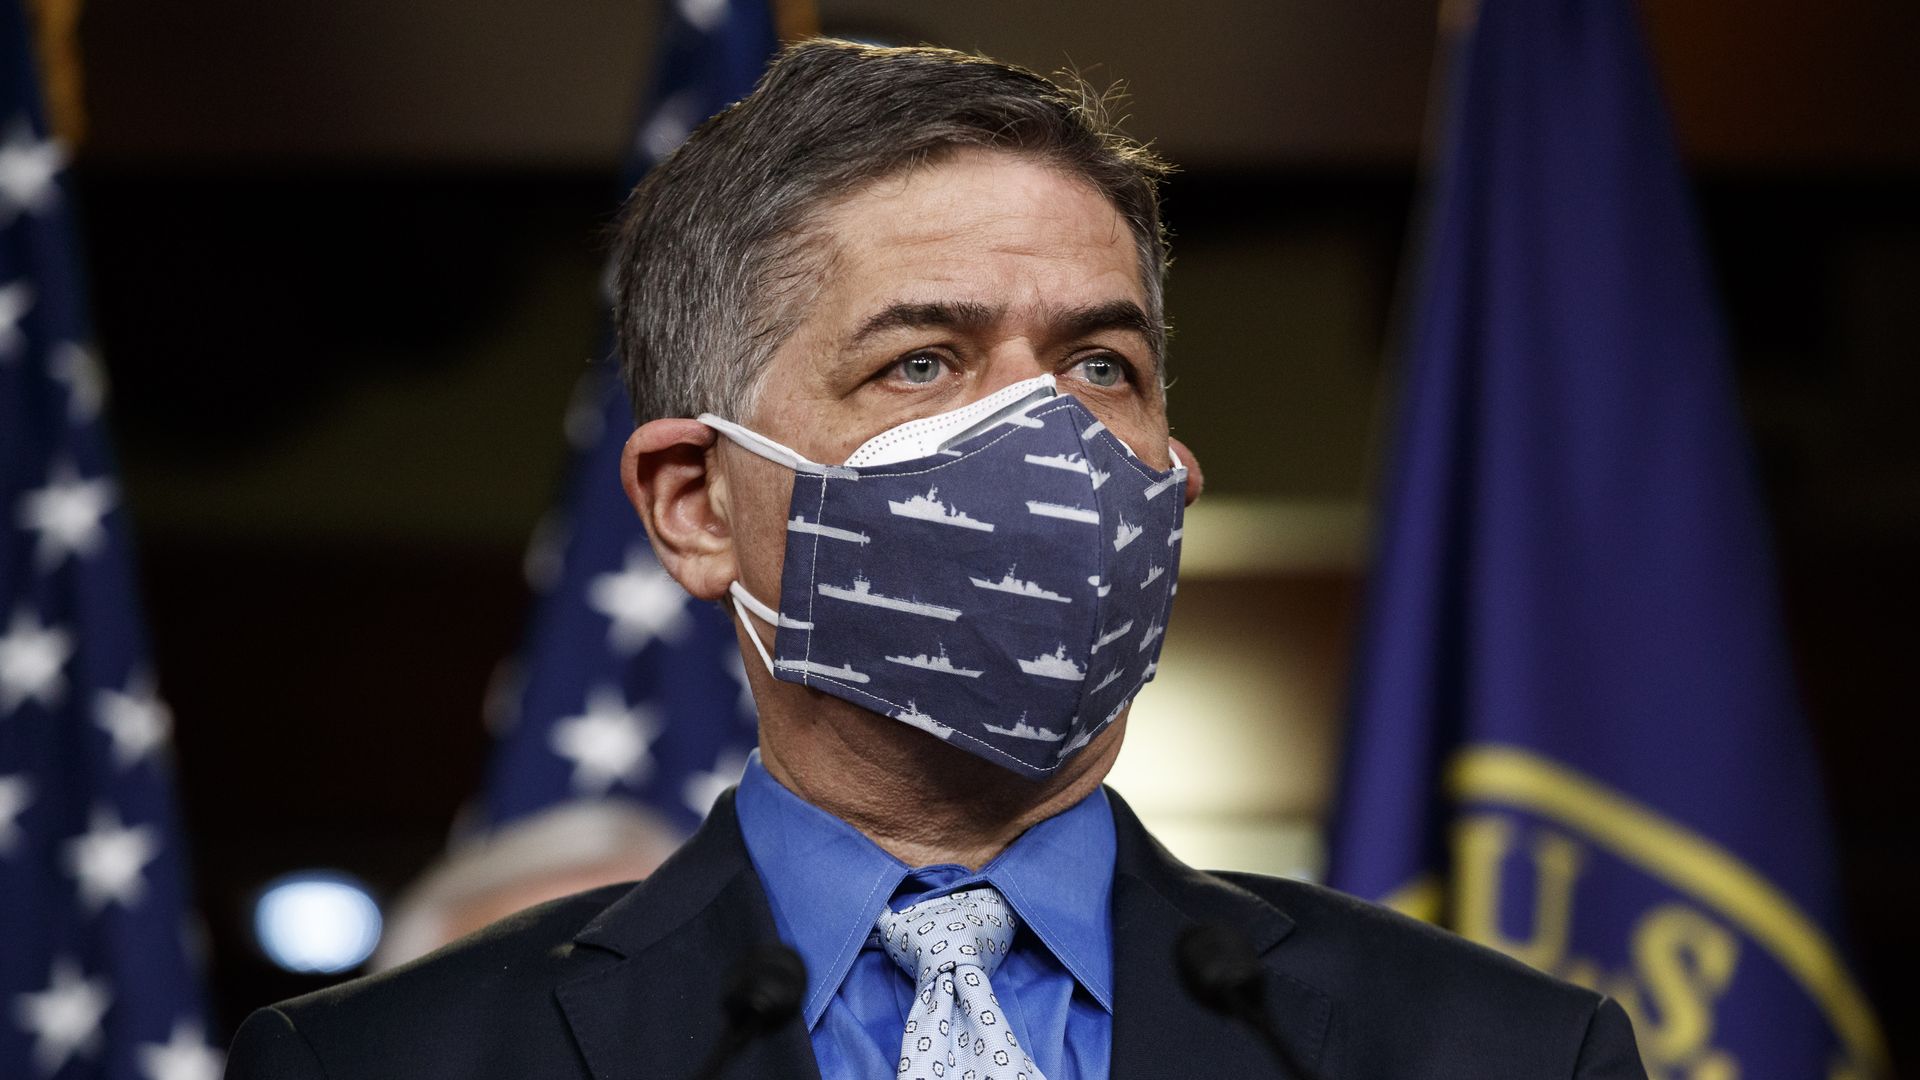 Rep. Filemon Vela of Texas is seen wearing a COVID mask during a news conference.